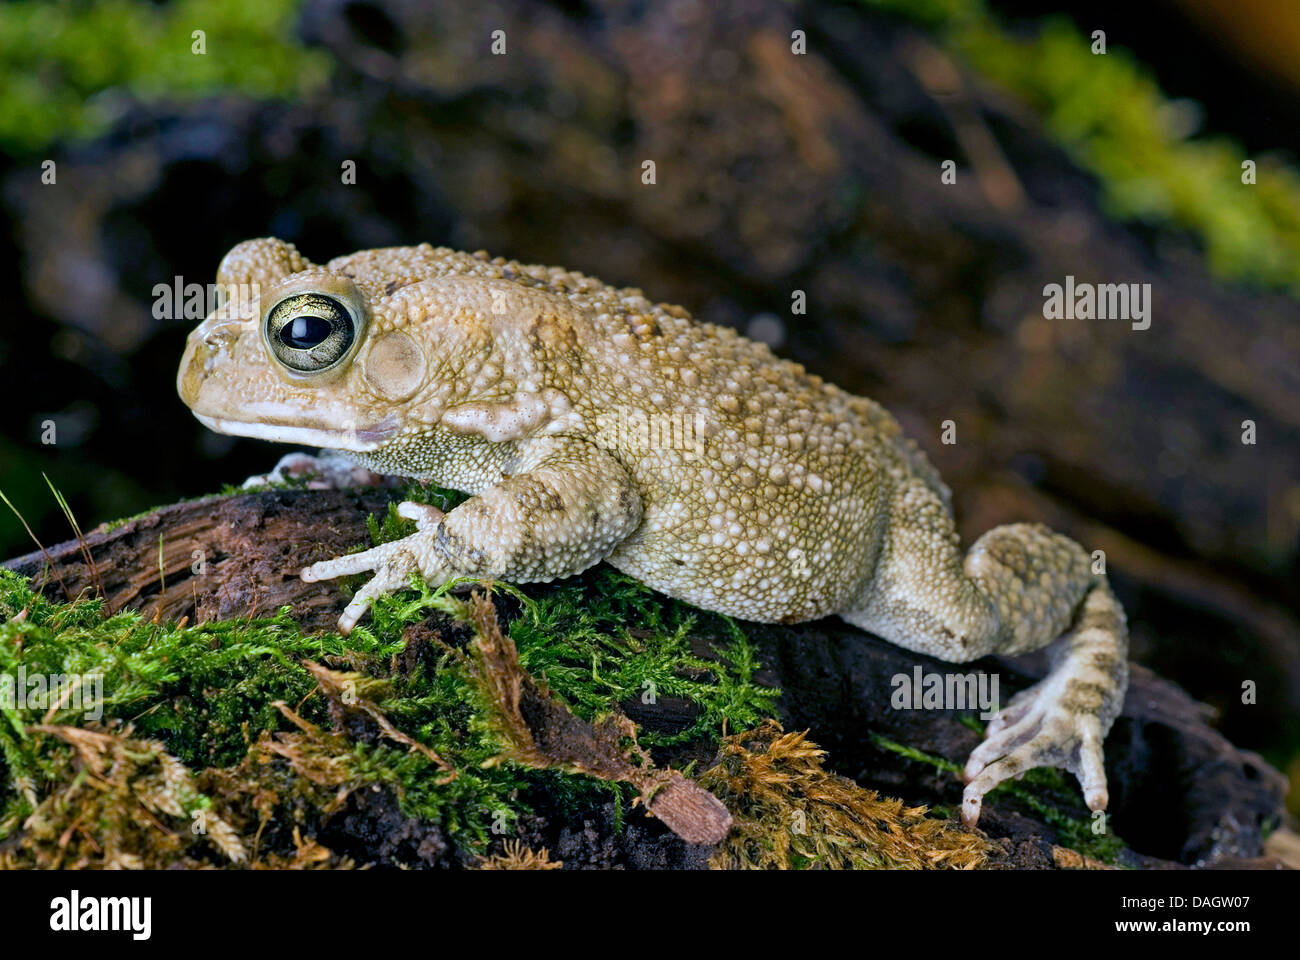 Panther toad, Square-marked Toad (Bufo regularis), on mossy bark Stock Photo